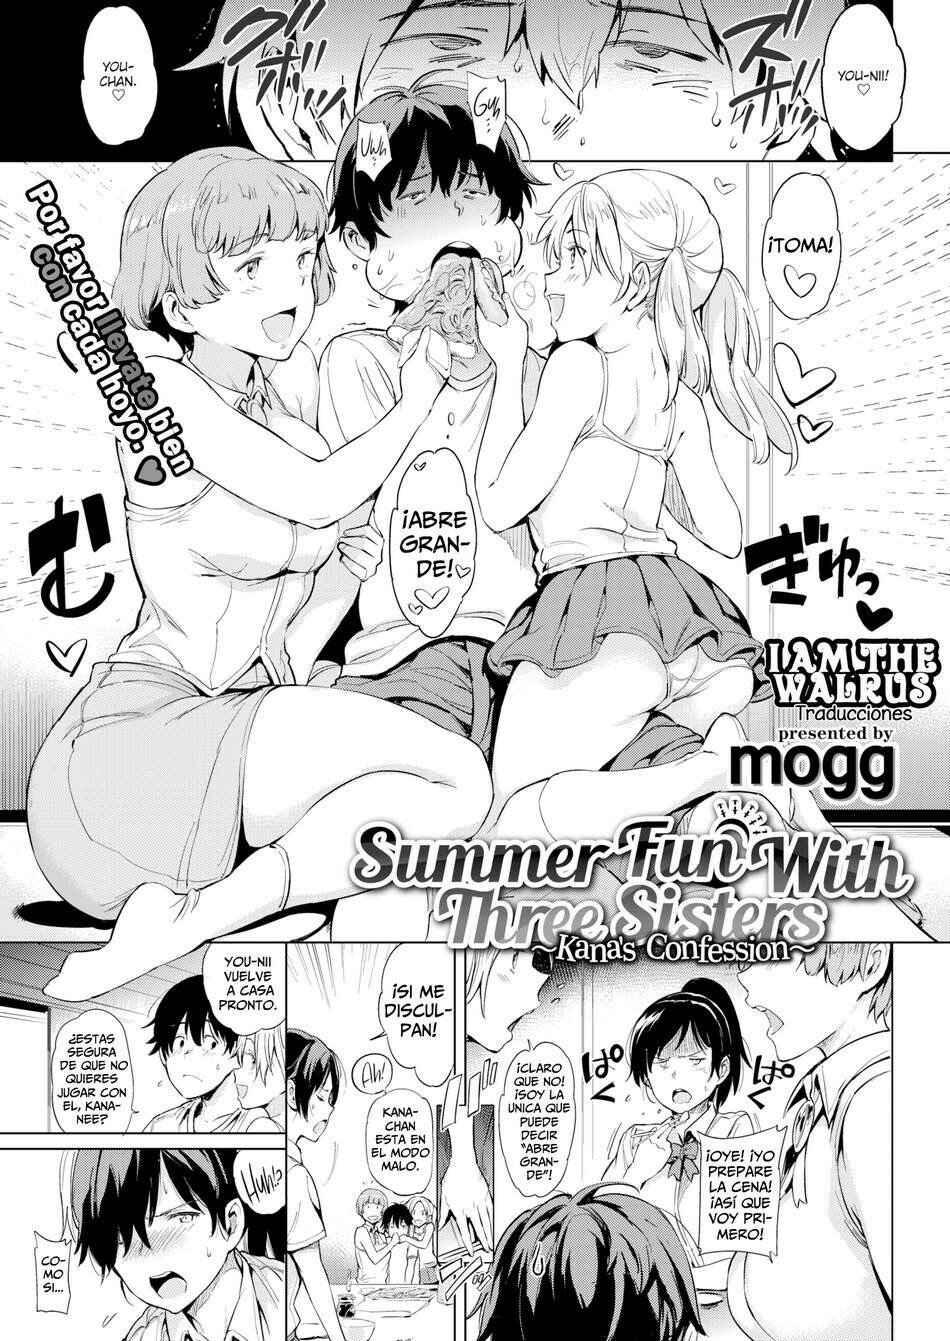 &#91;mogg&#93; Summer Fun With Three Sisters 2 - 0